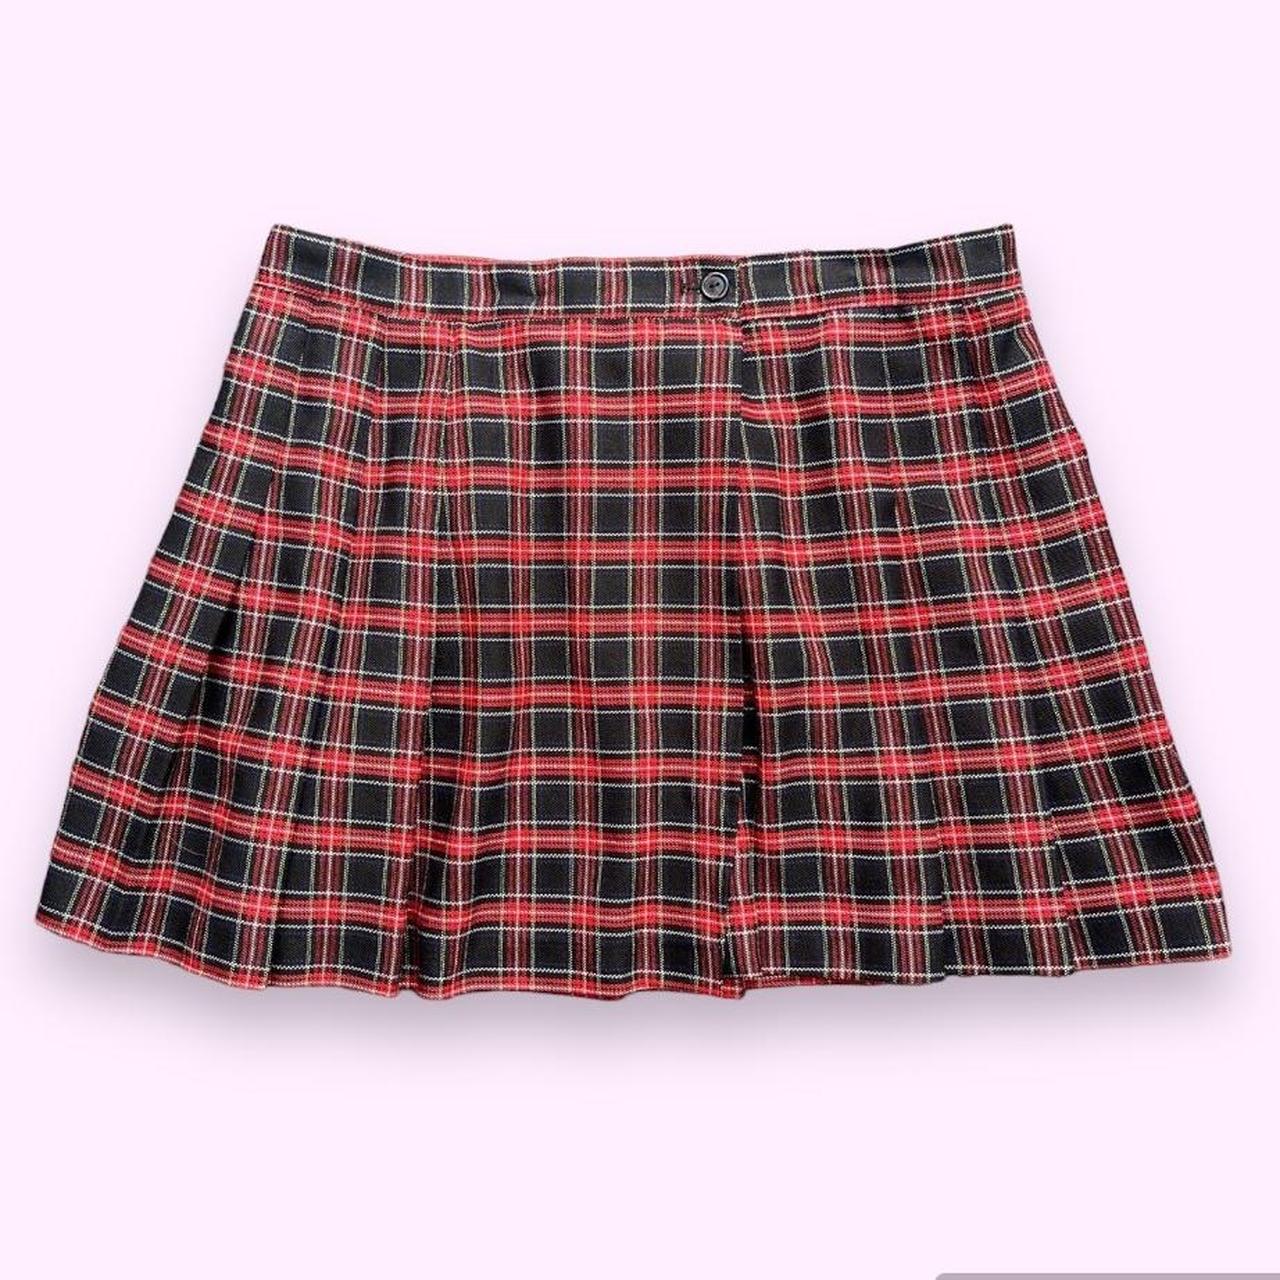 Joules Women's Red and Black Skirt